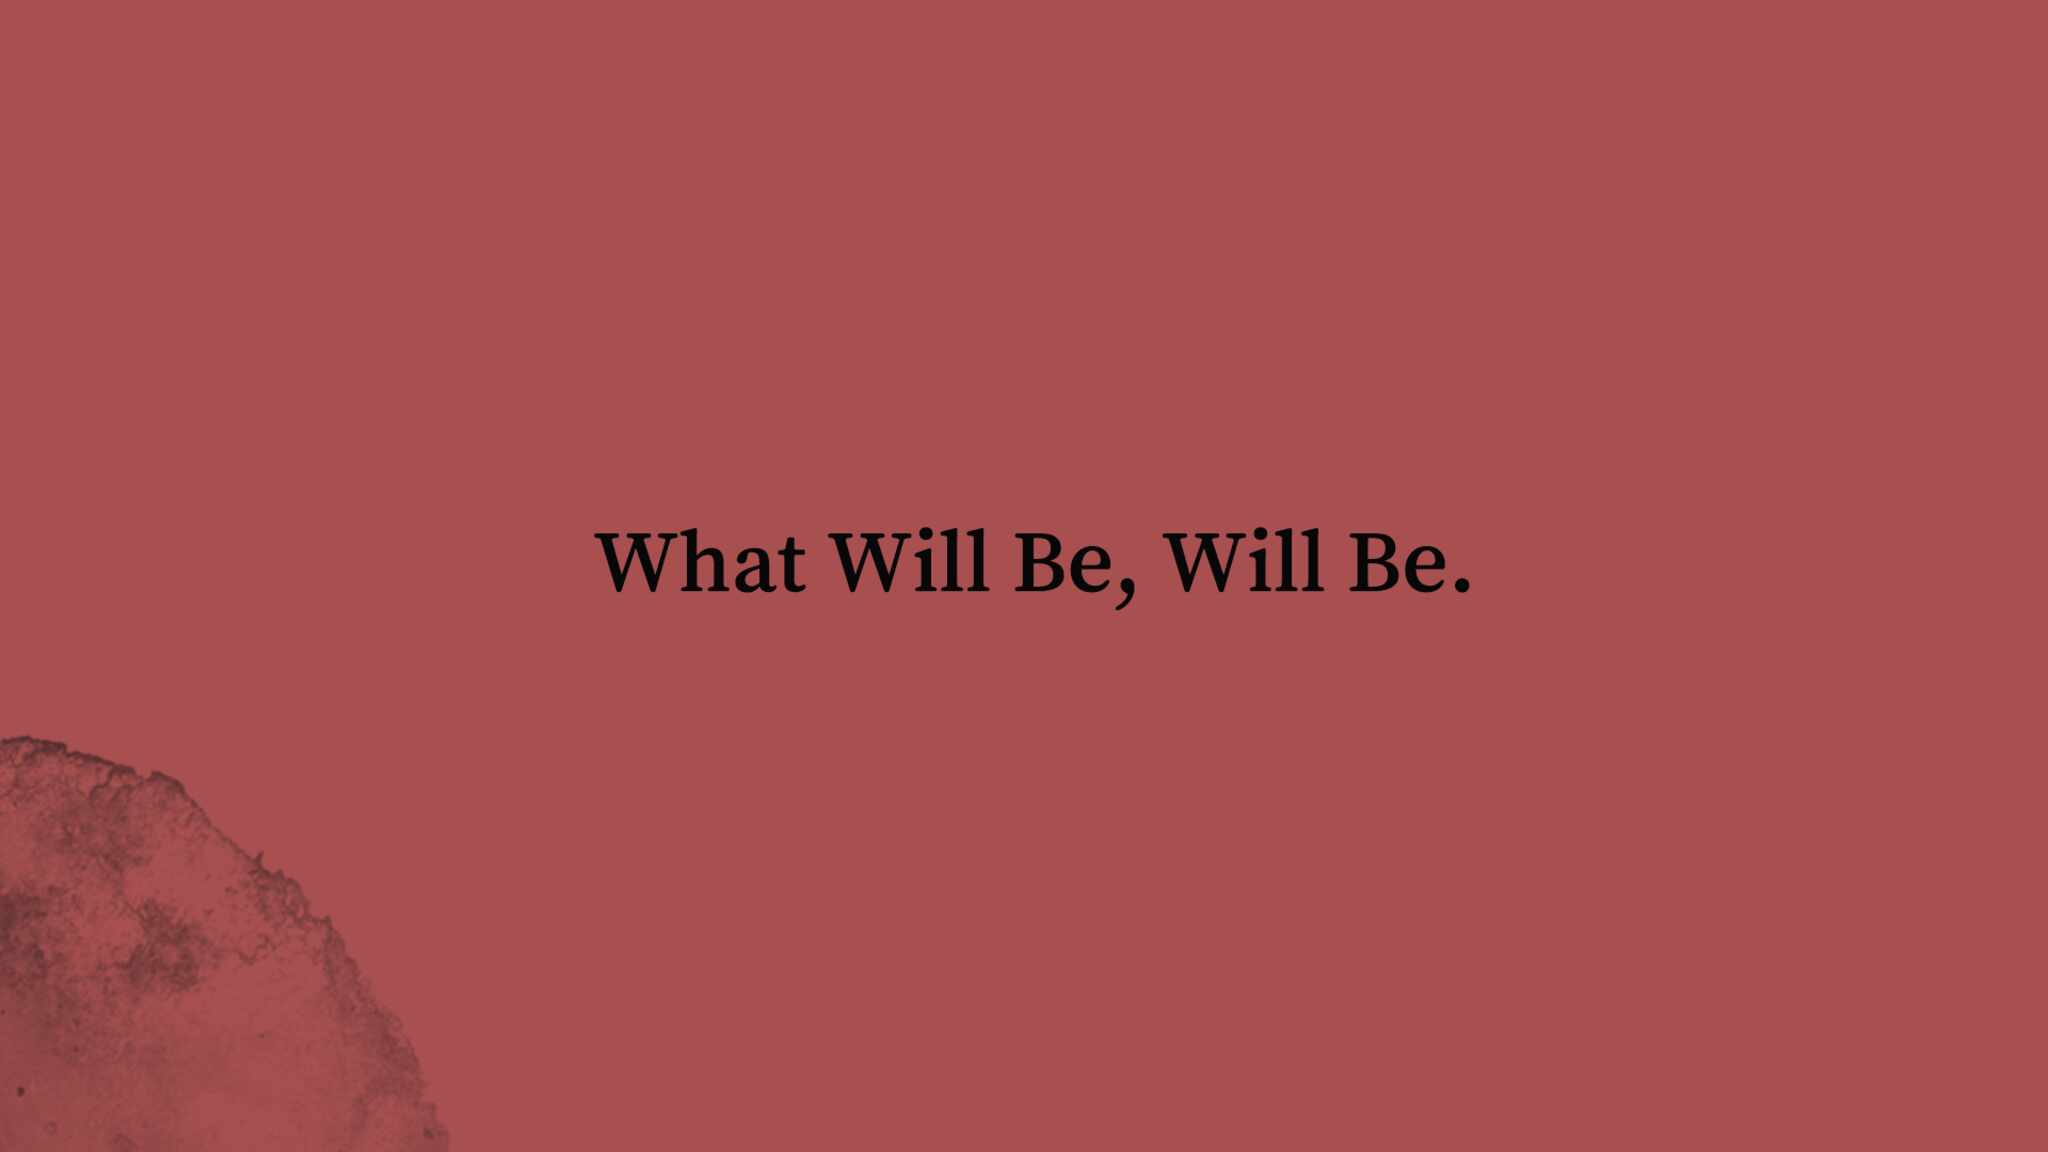 What Will Be, Will Be.